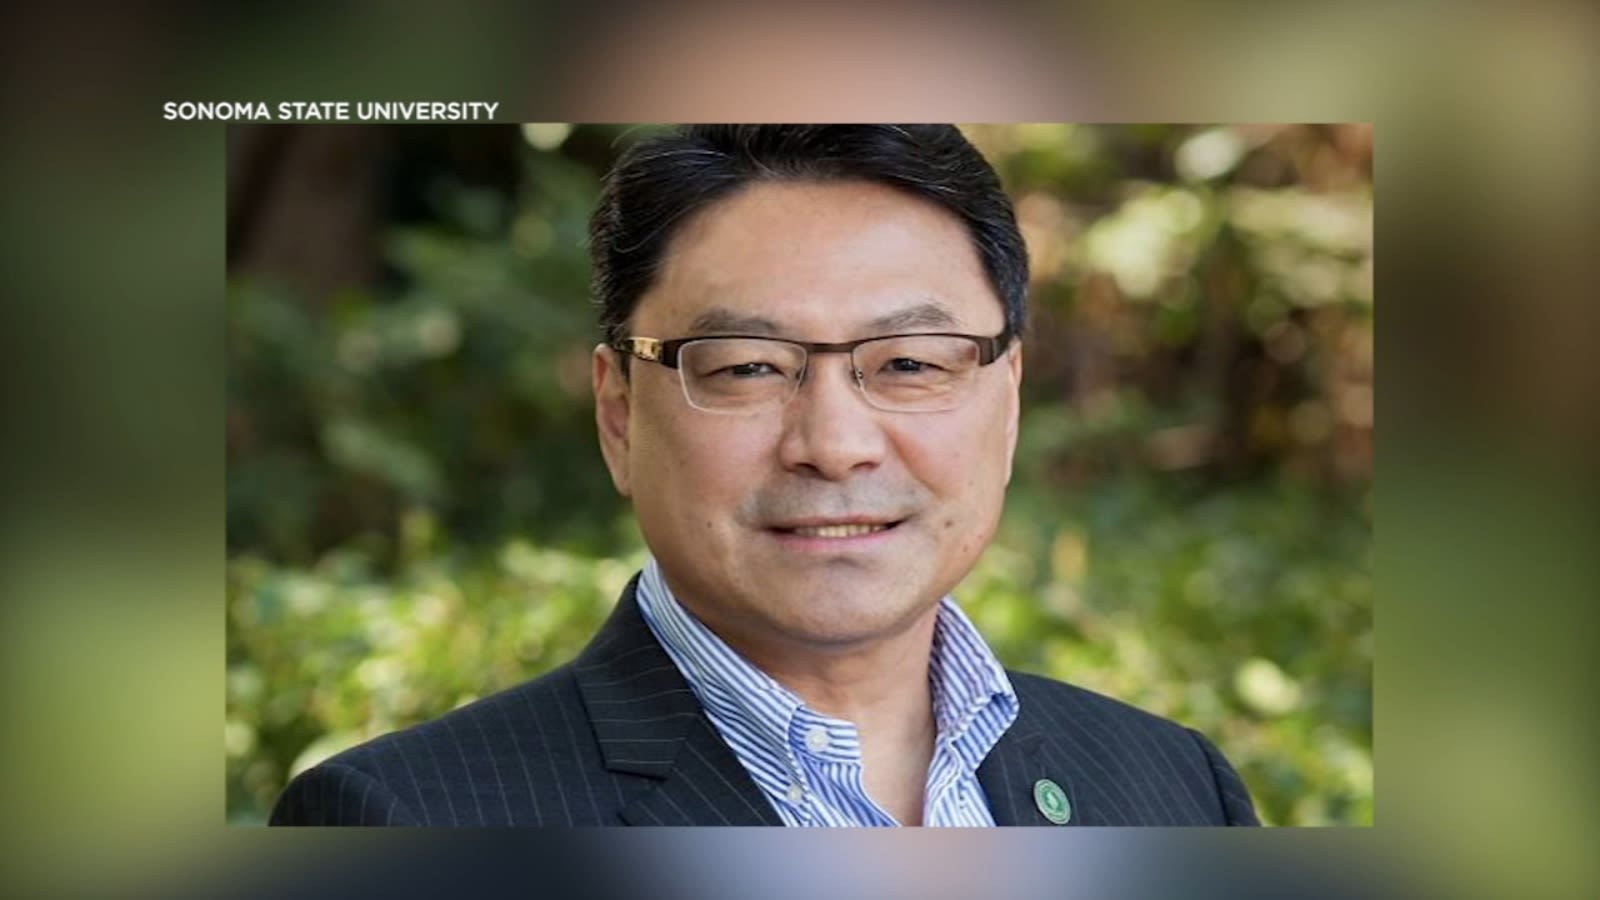 Sonoma State president retires after being placed on administrative leave for 'insubordination'